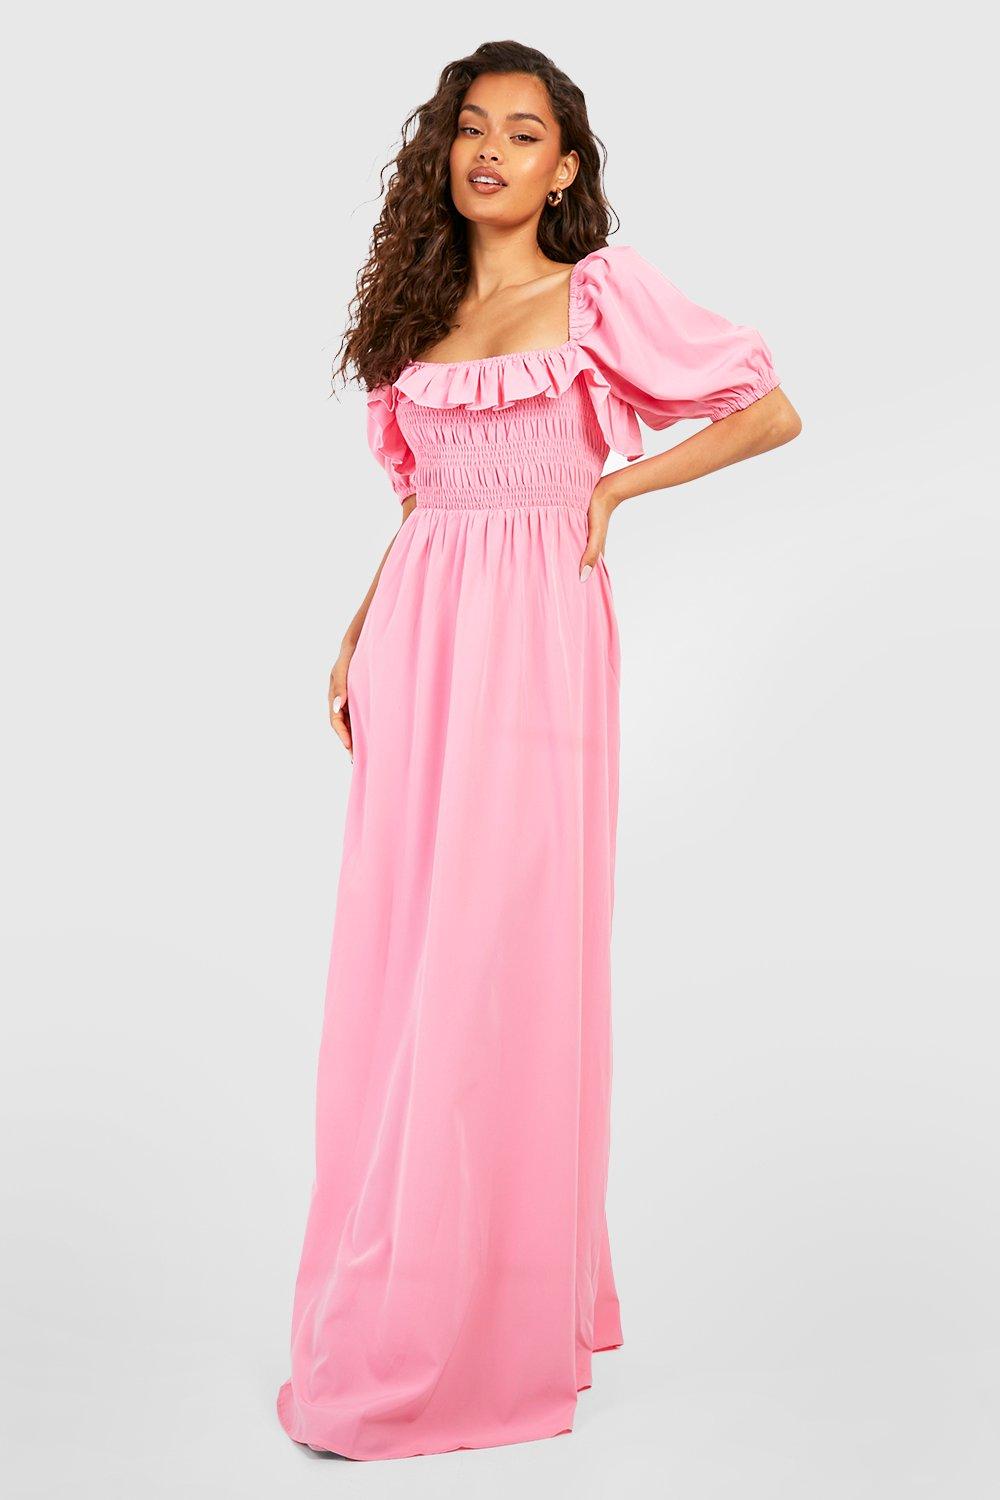 80s Prom Dresses – Party, Cocktail, Bridesmaid, Formal Womens Puff Sleeve Shirred Maxi Dress - Pink - 14 $50.00 AT vintagedancer.com